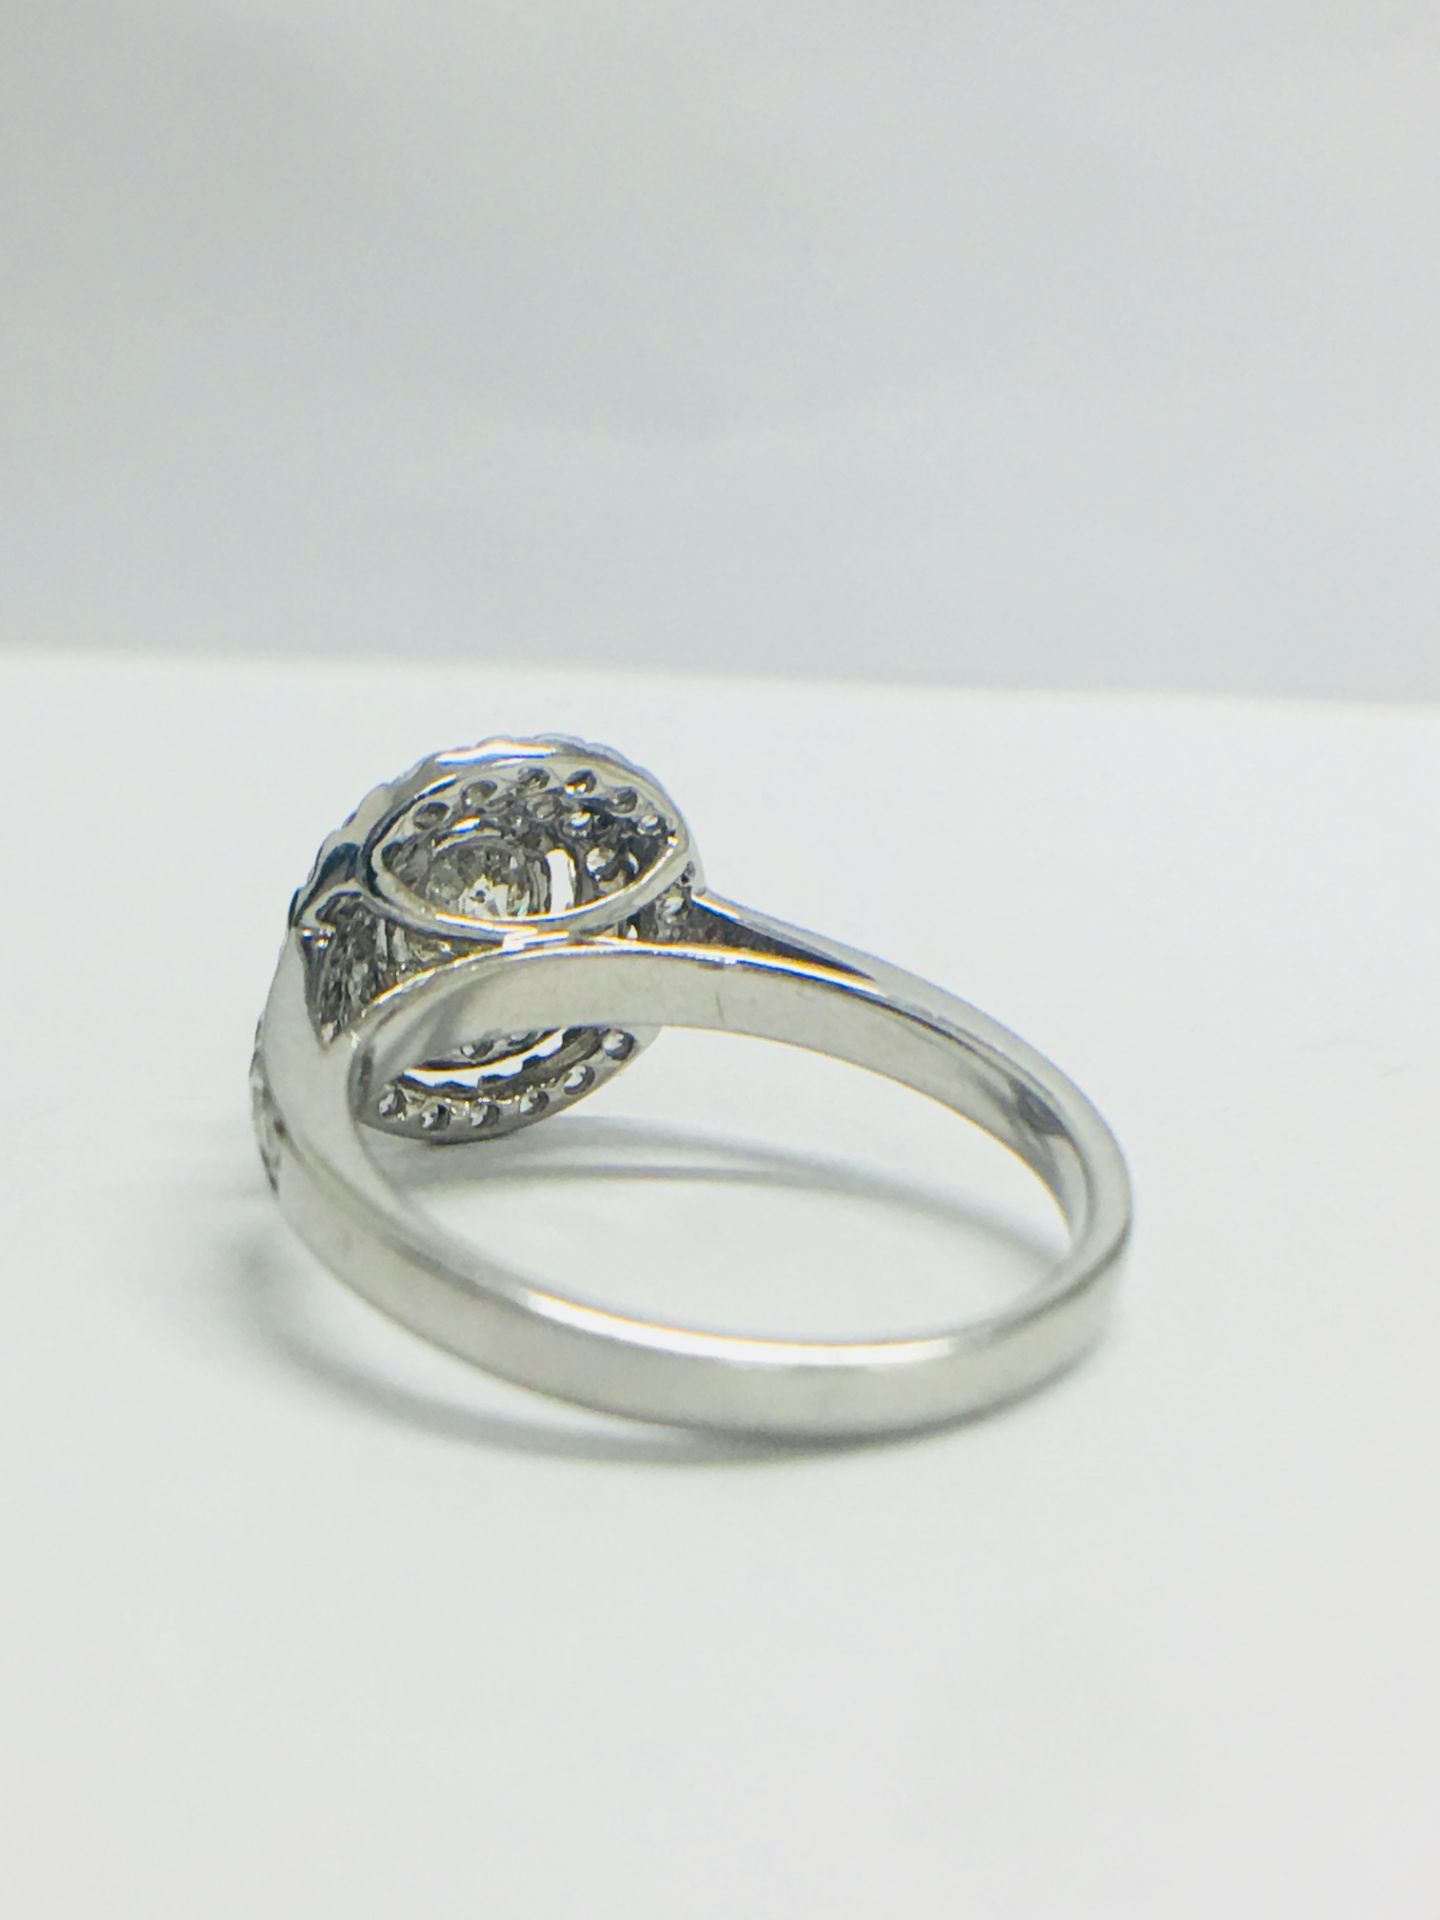 Platinum Double Halo Style Ring1.40Ct Total Diamond Weight, - Image 5 of 11